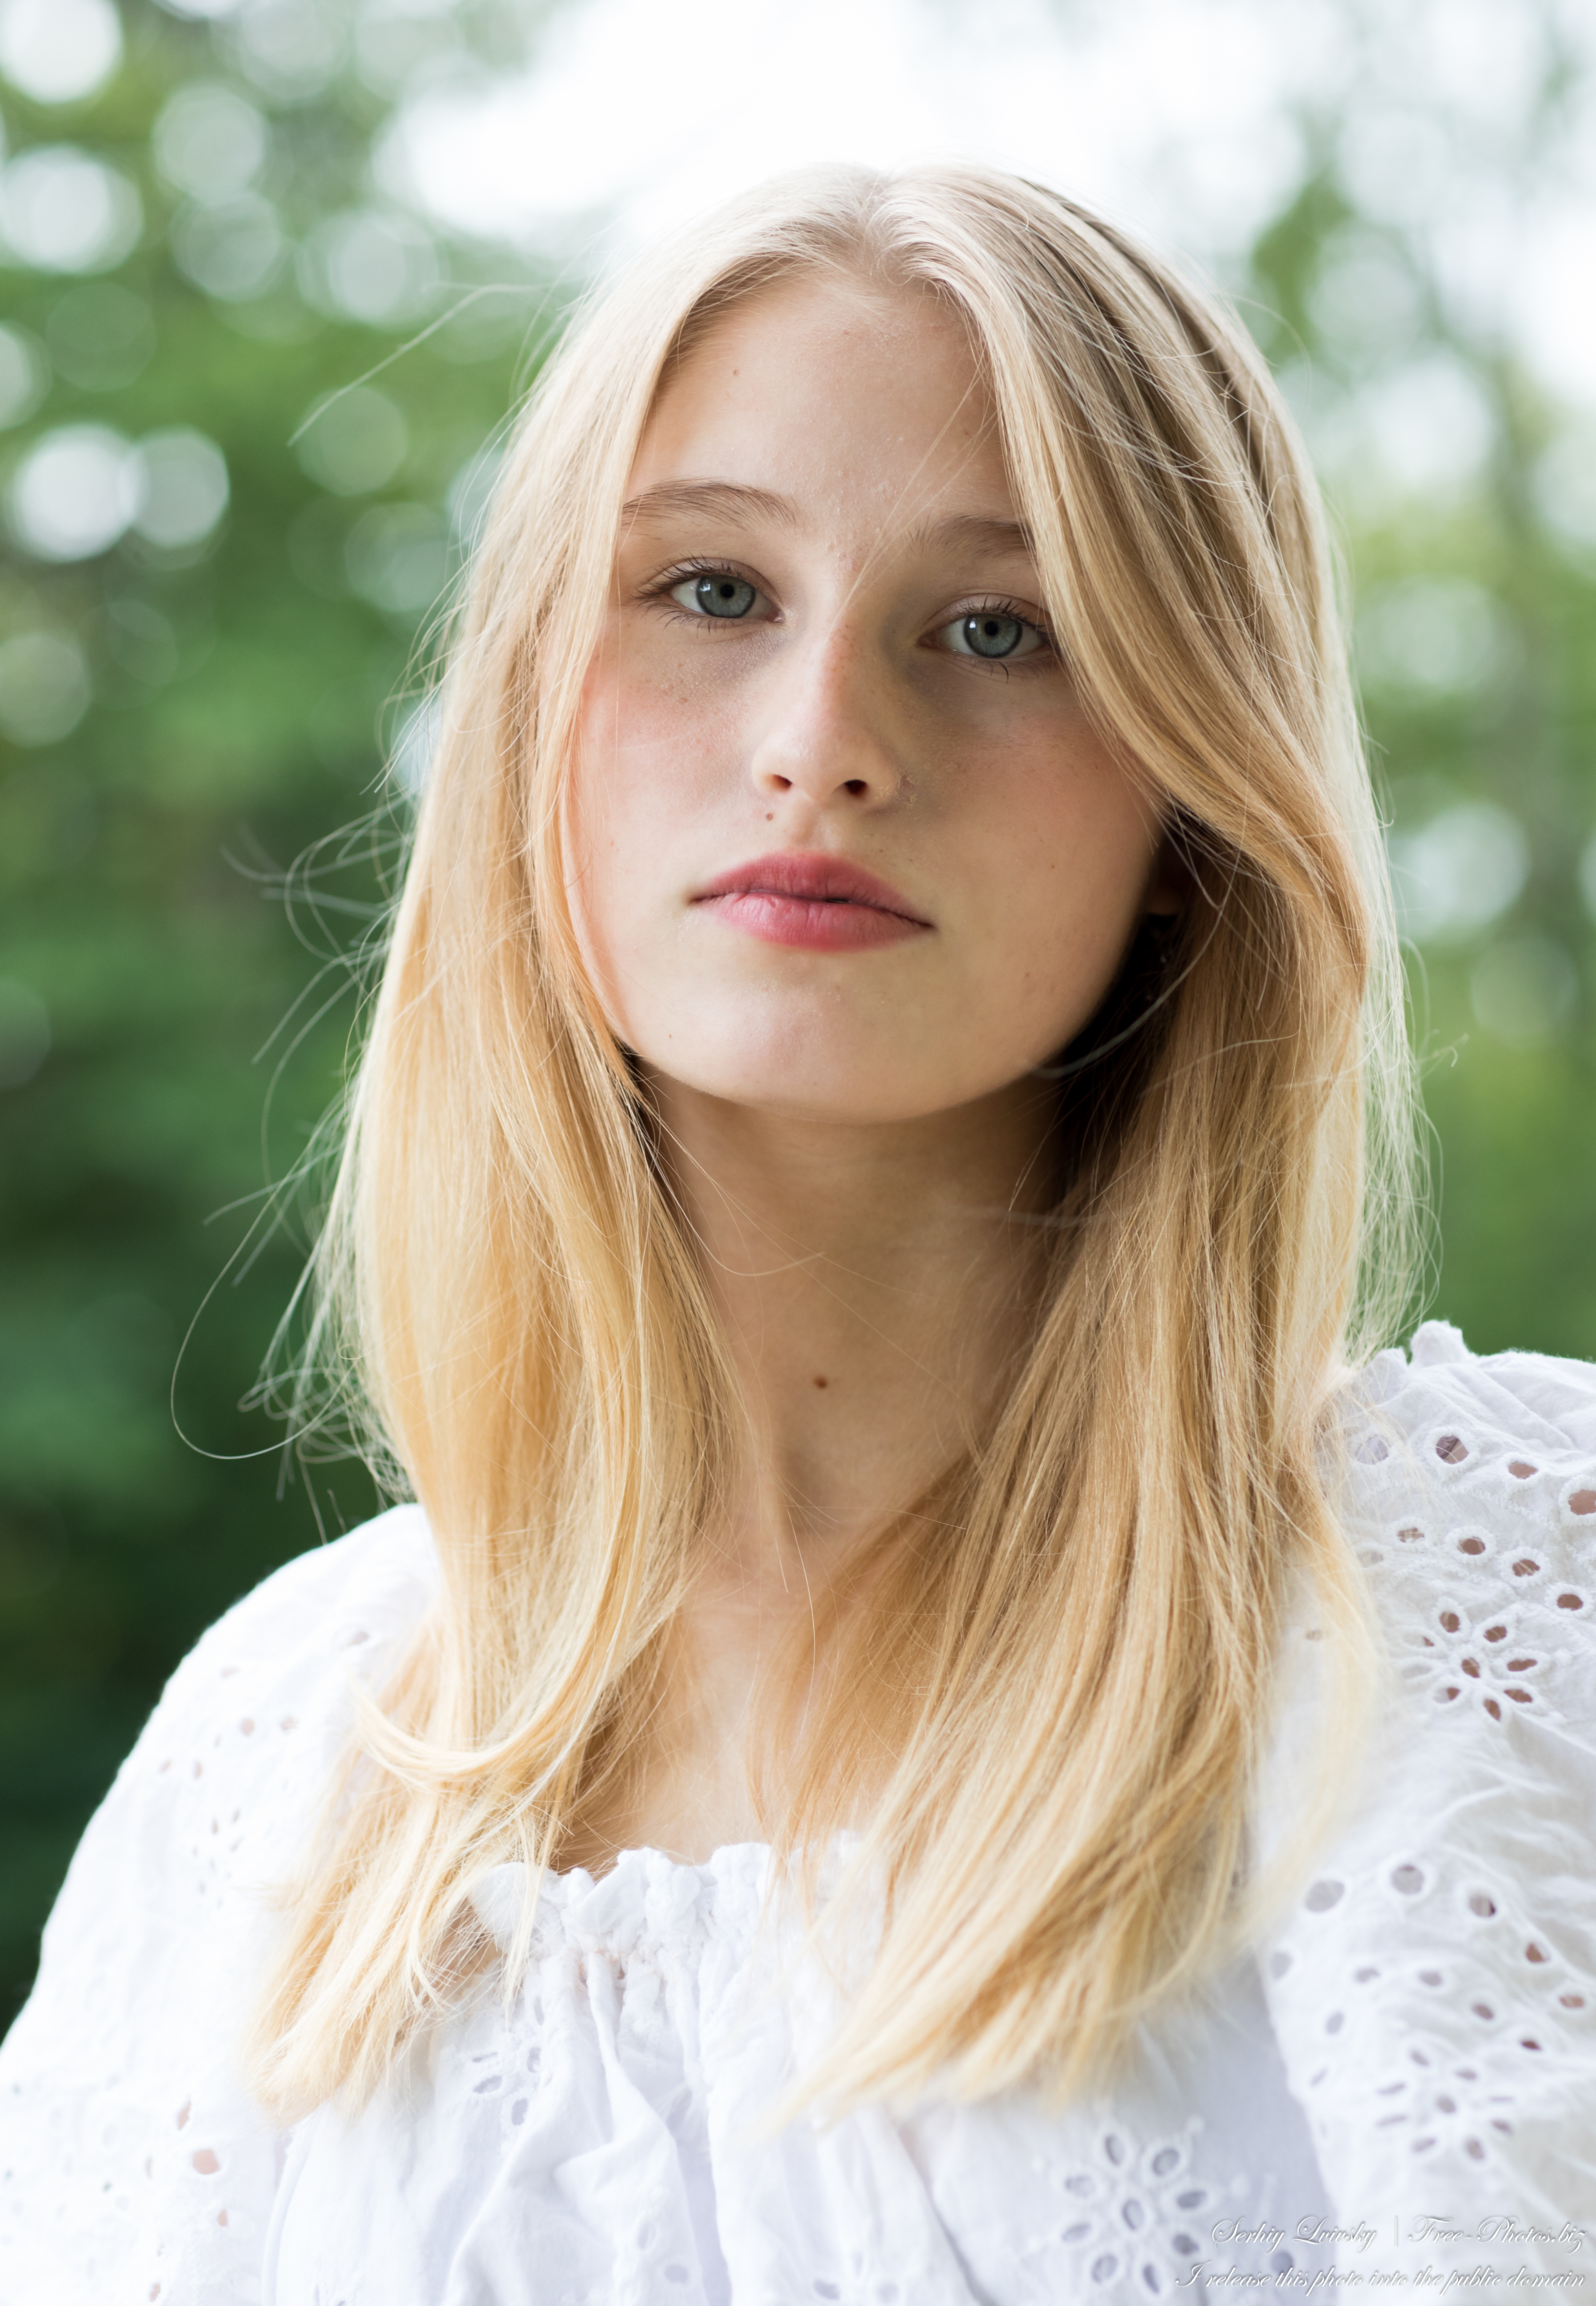 joanna_a_15-year-old_girl_with_natural_lips_and_blonde_hair_july_2023_by_serhiy_lvivsky_21